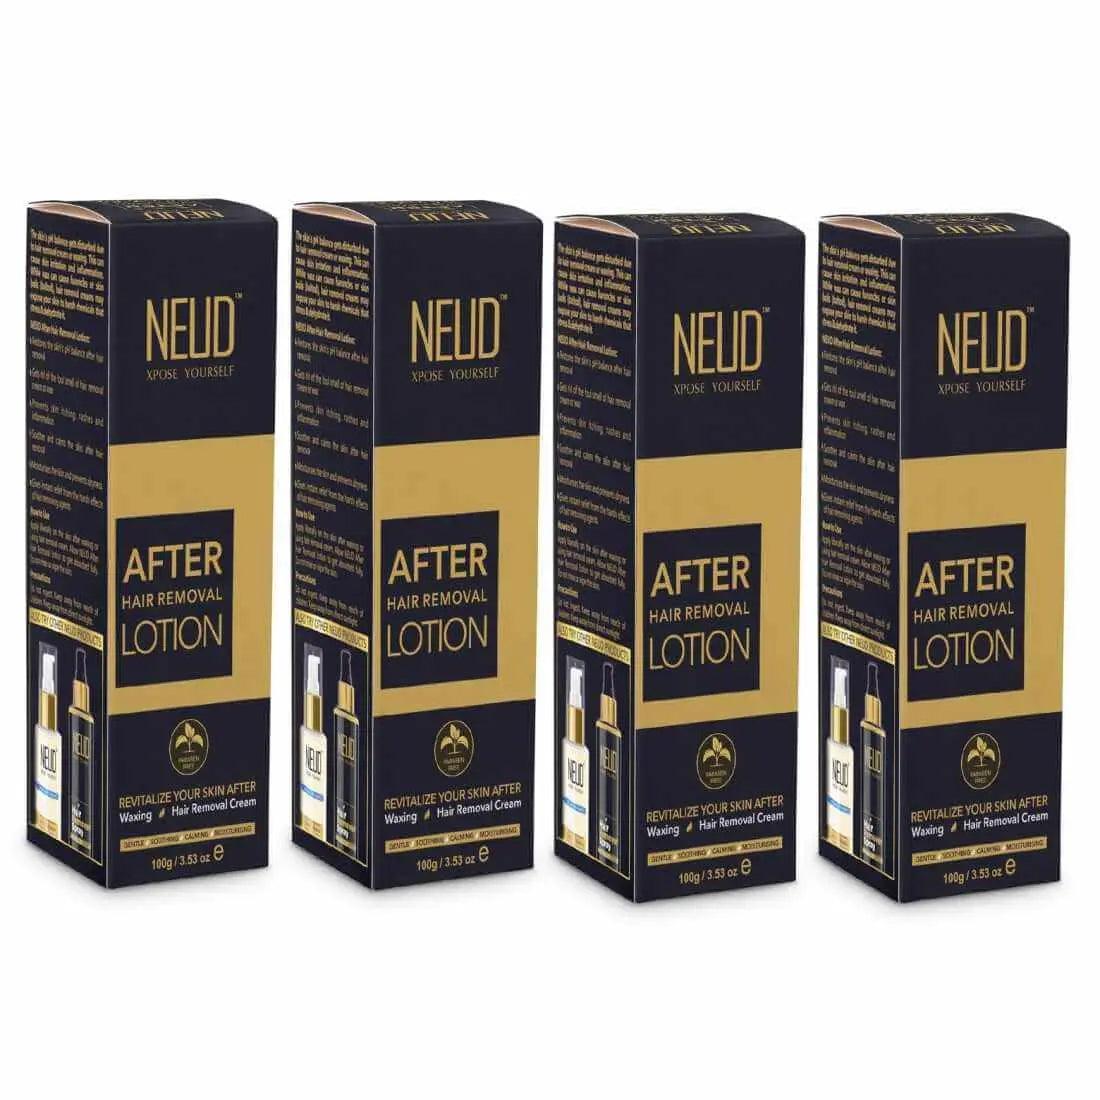 NEUD After-Hair-Removal Lotion for Skin Care in Men & Women - 100g 8903540011616